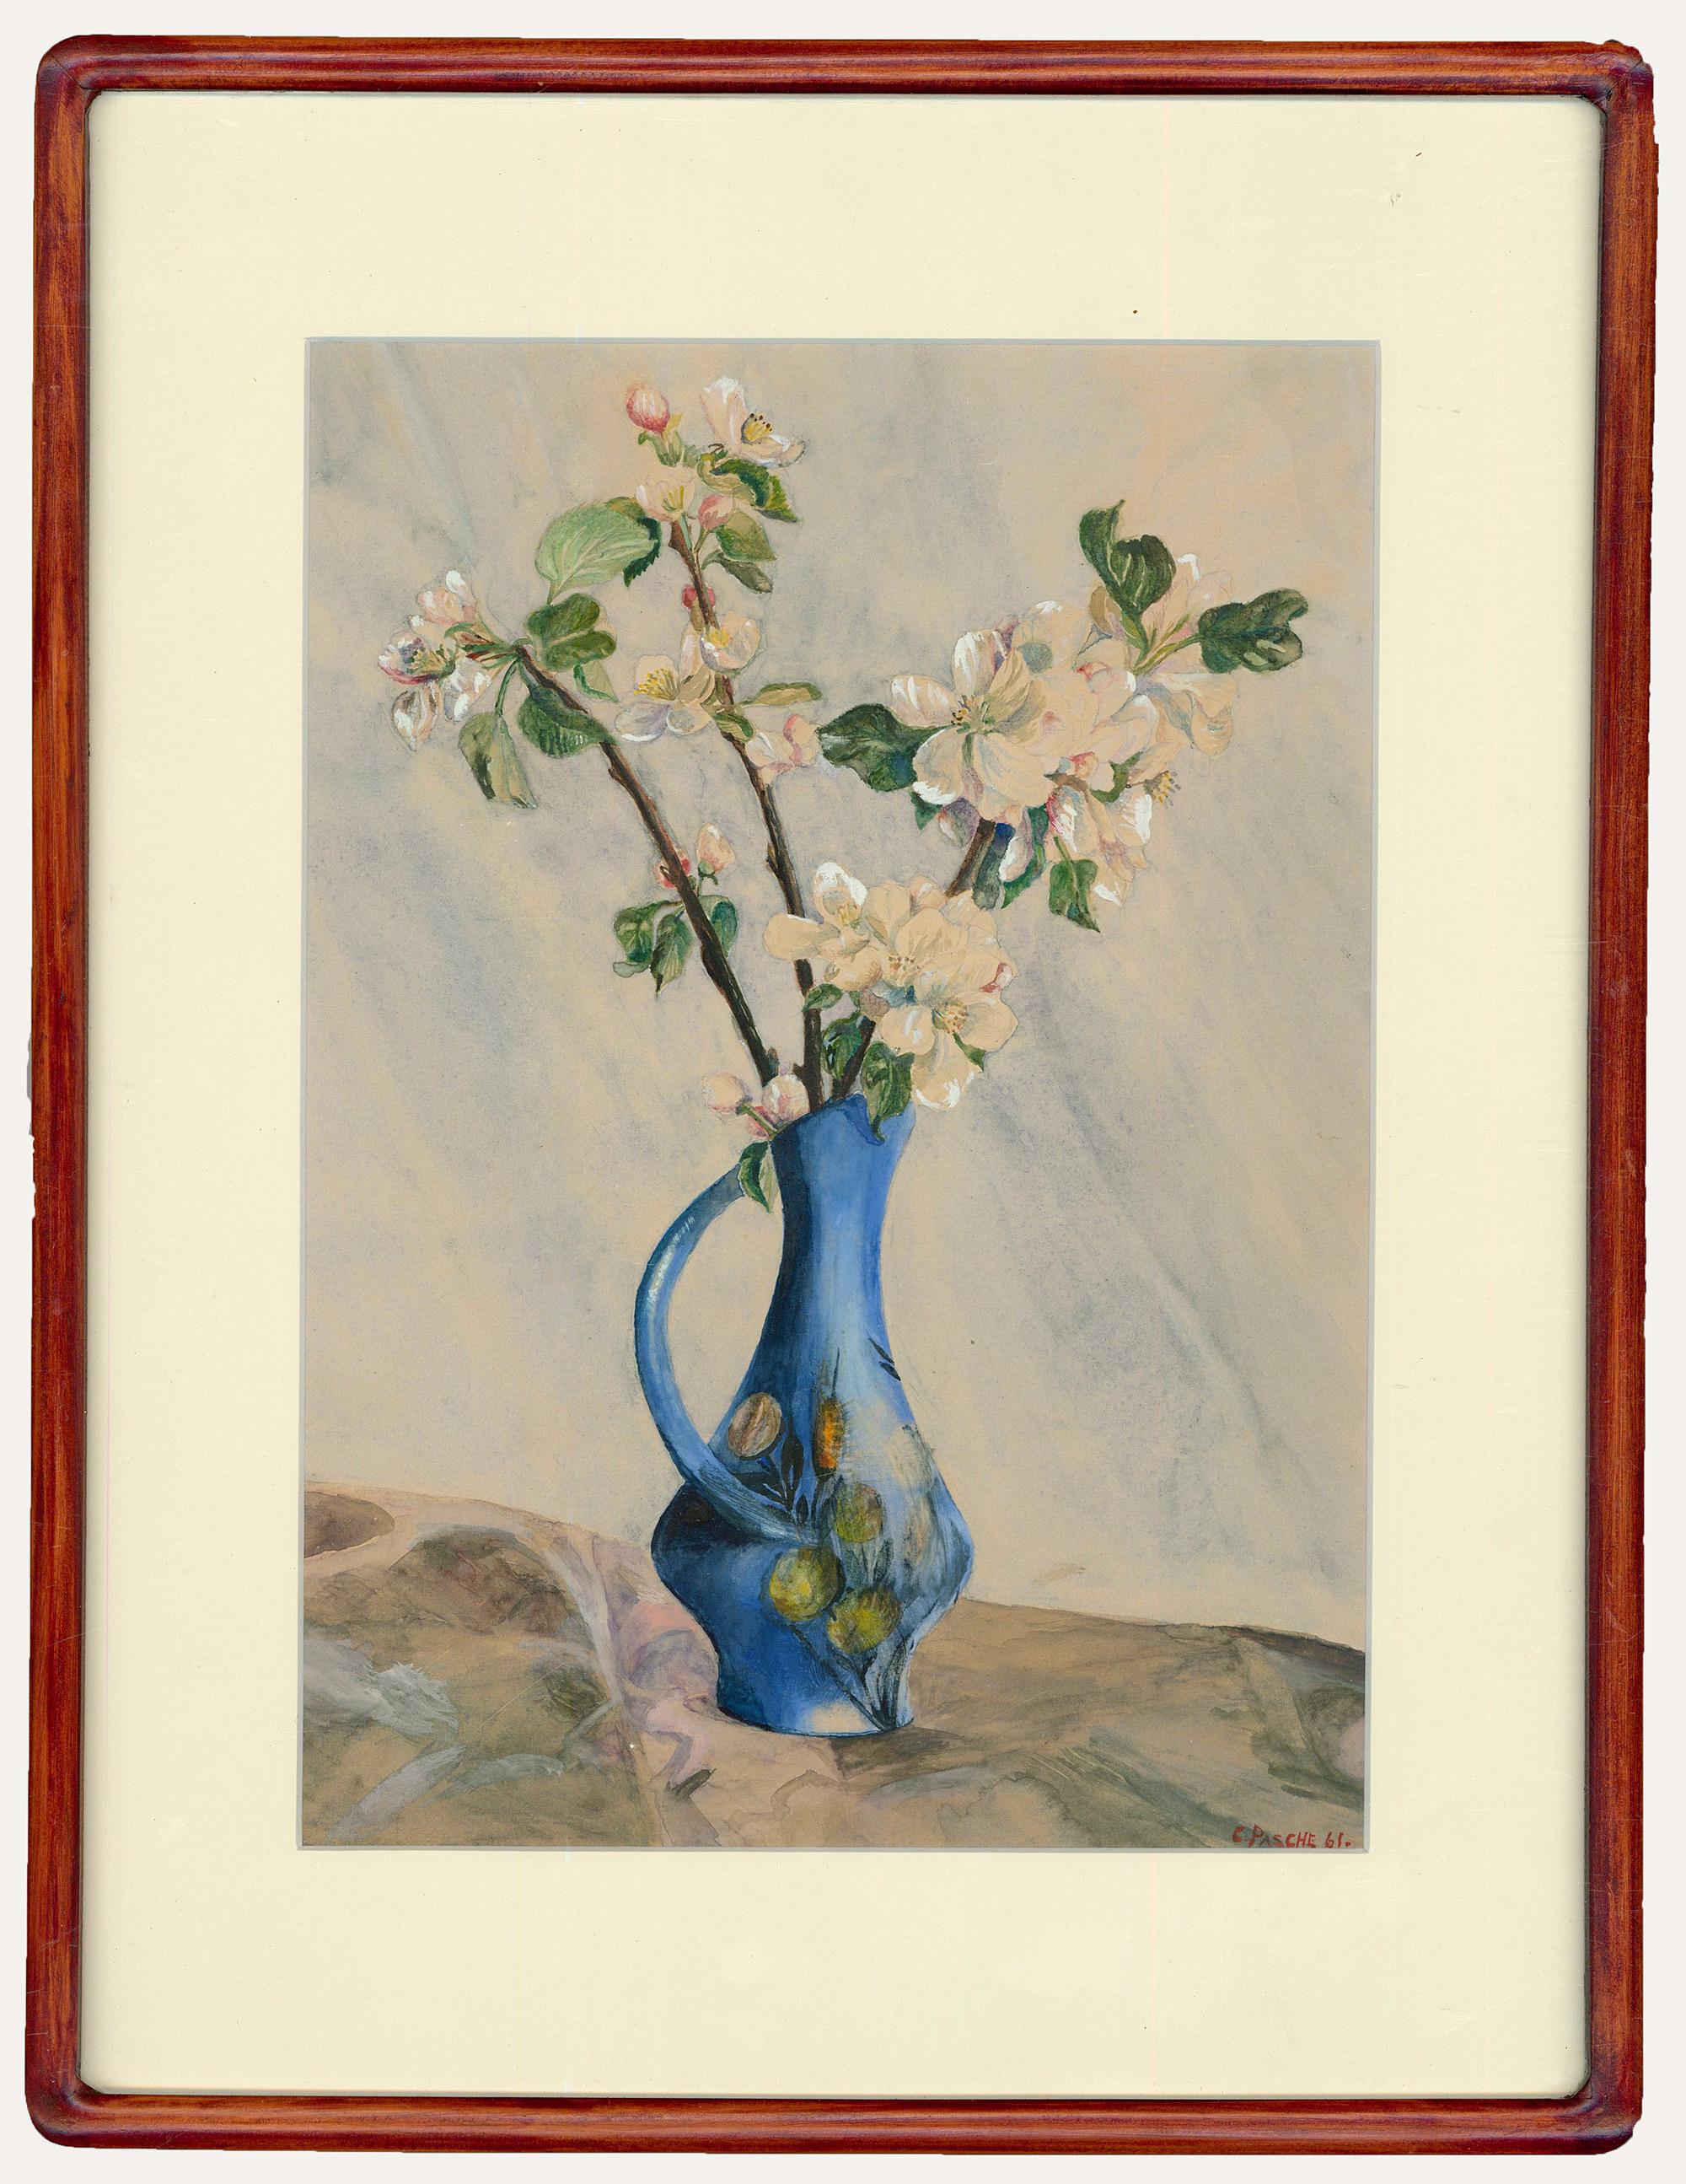 Inspired by the Japanese art of Ikebana this still life study of blossom is both elegant and delicate. Completed with touches of gouache to highlight the blossom petals. Excellently presented in a gorgeous wood frame with curved corners. Signed and